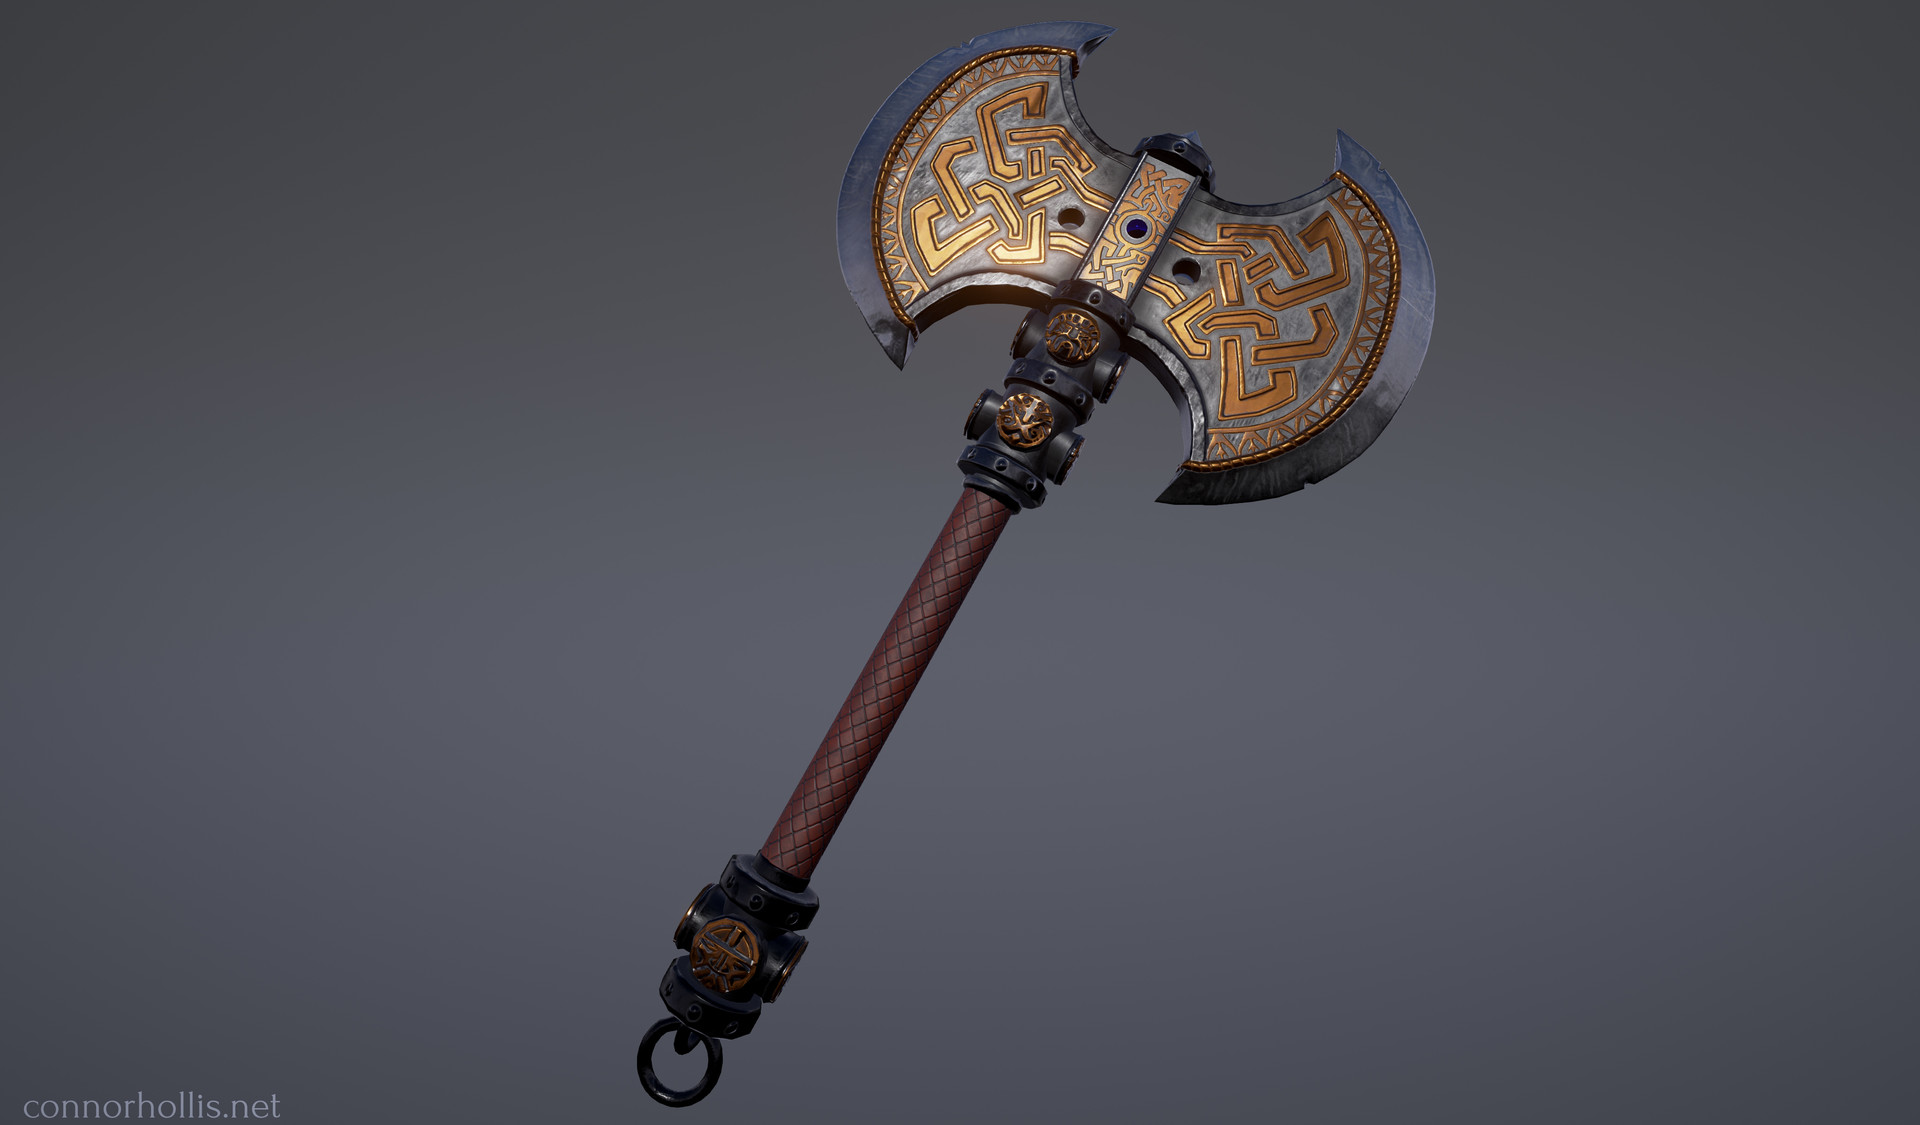 This is a personal project of mine where I tried to make an axe from a conc...